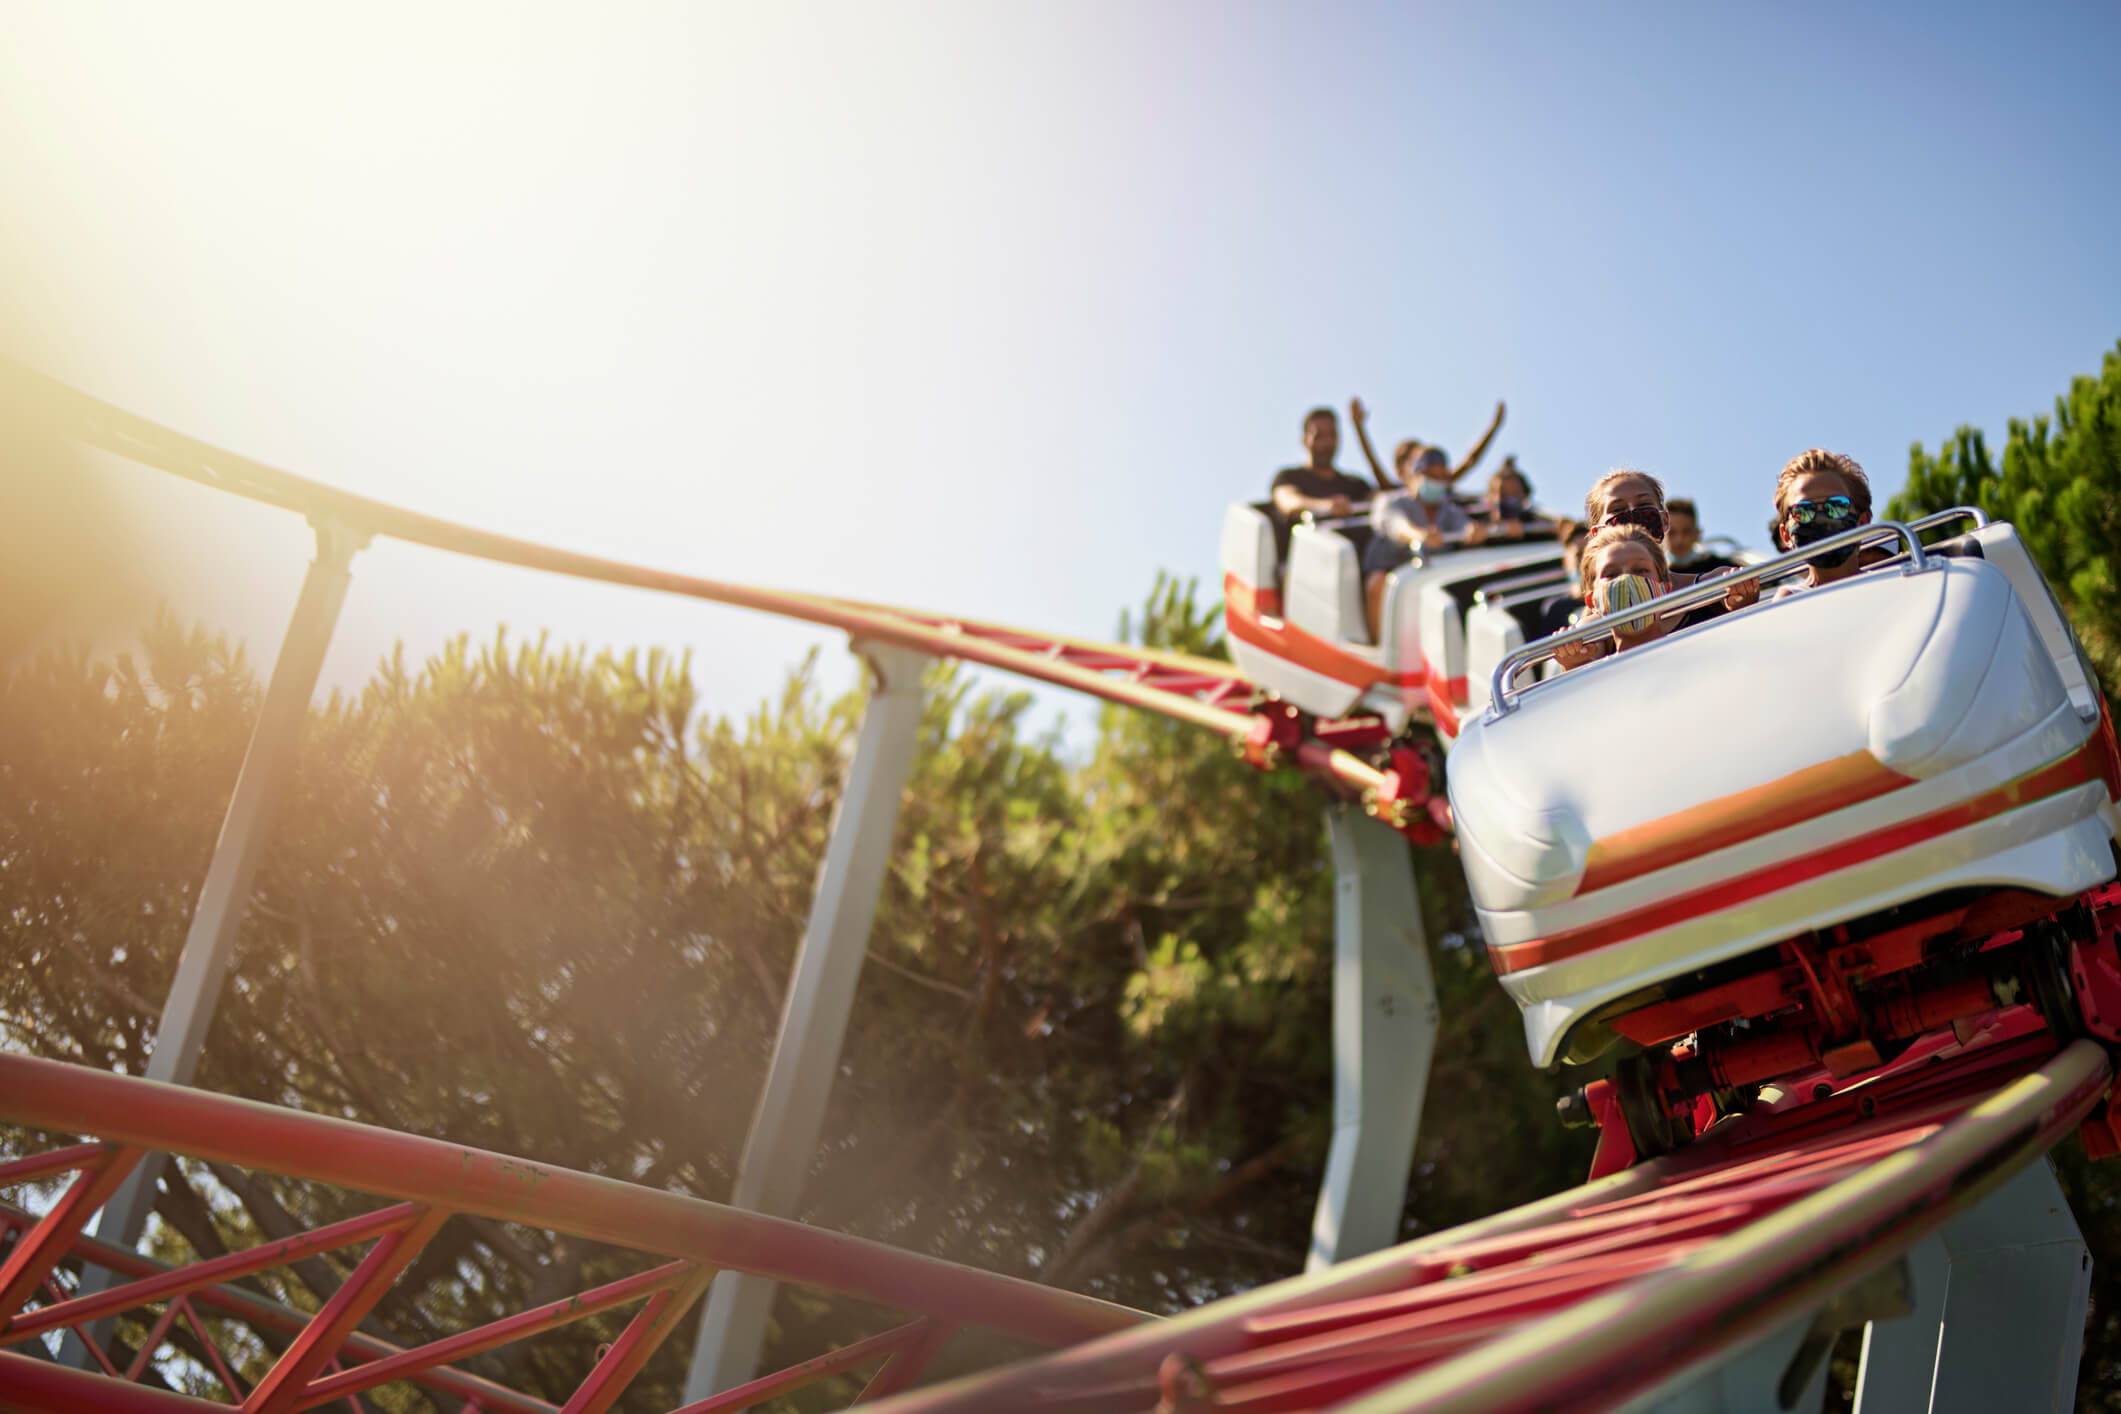 Buckle Up for Safety: The Rides Are About to Restart